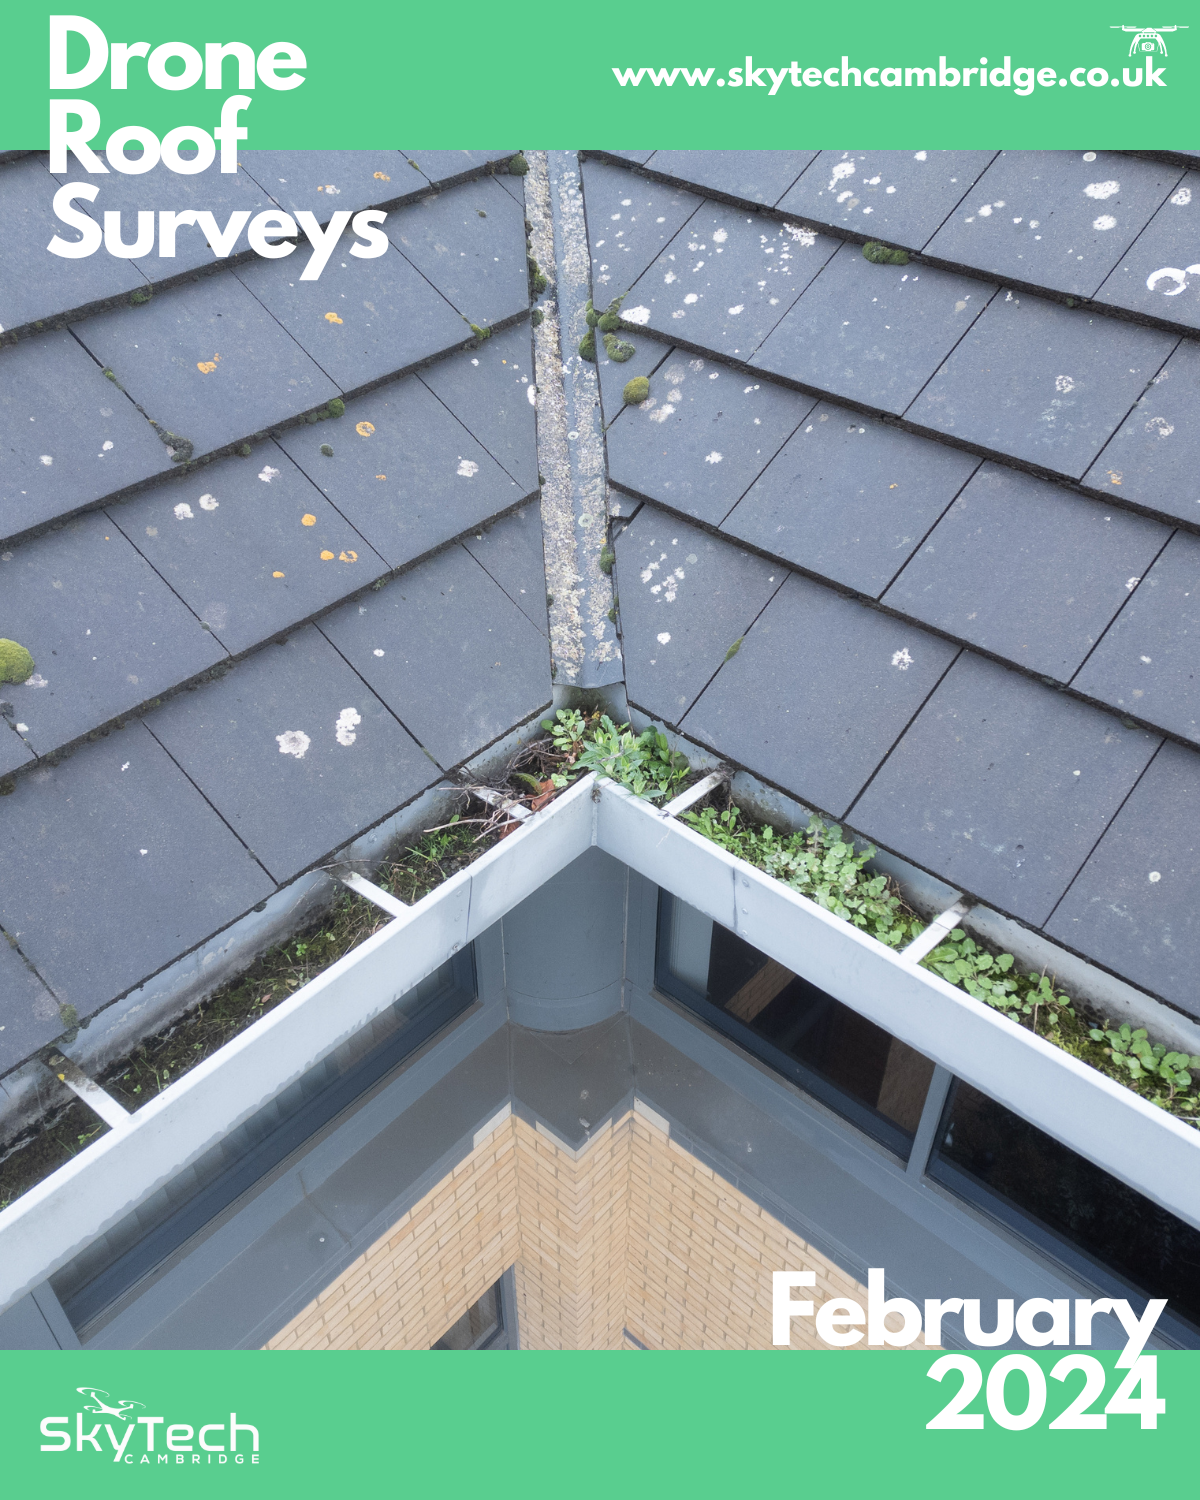 Drone roof survey - blocked guttering likely to cause drainage issues